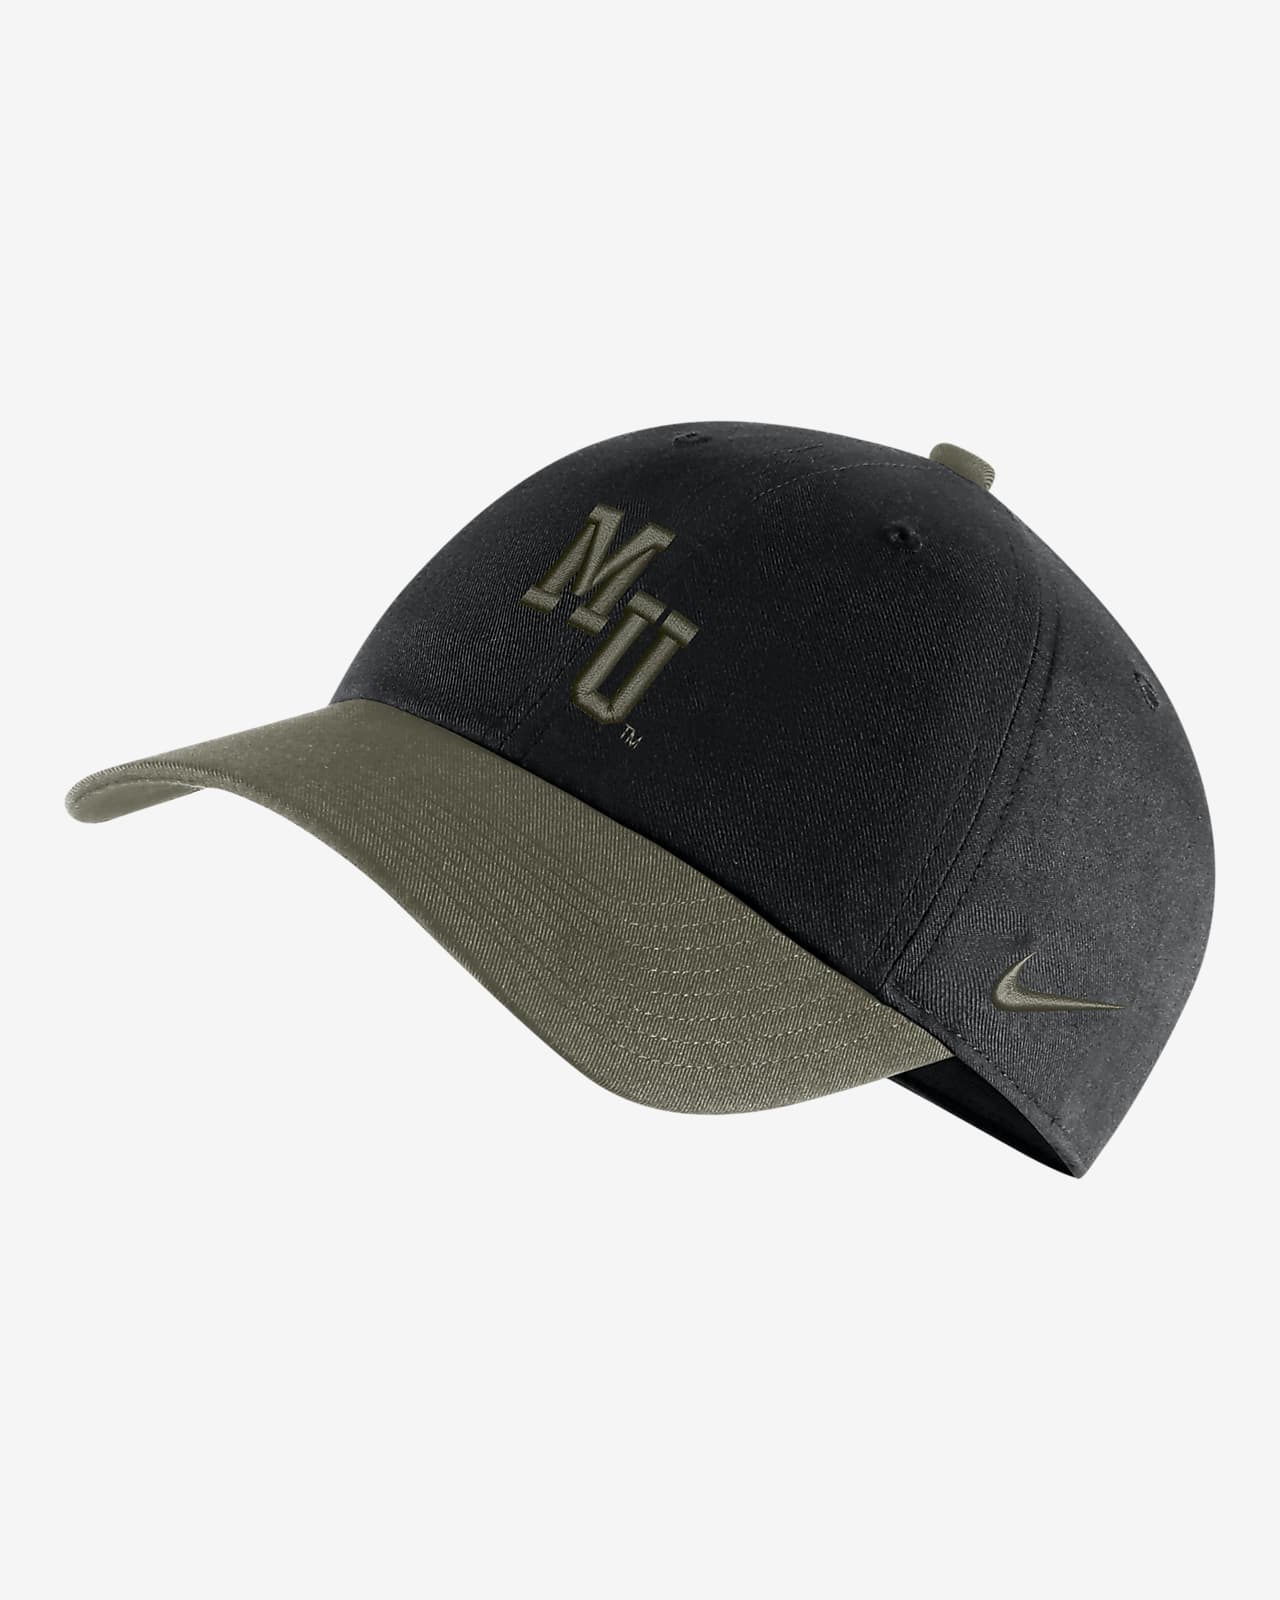 Marquette Heritage86 Nike College Hat